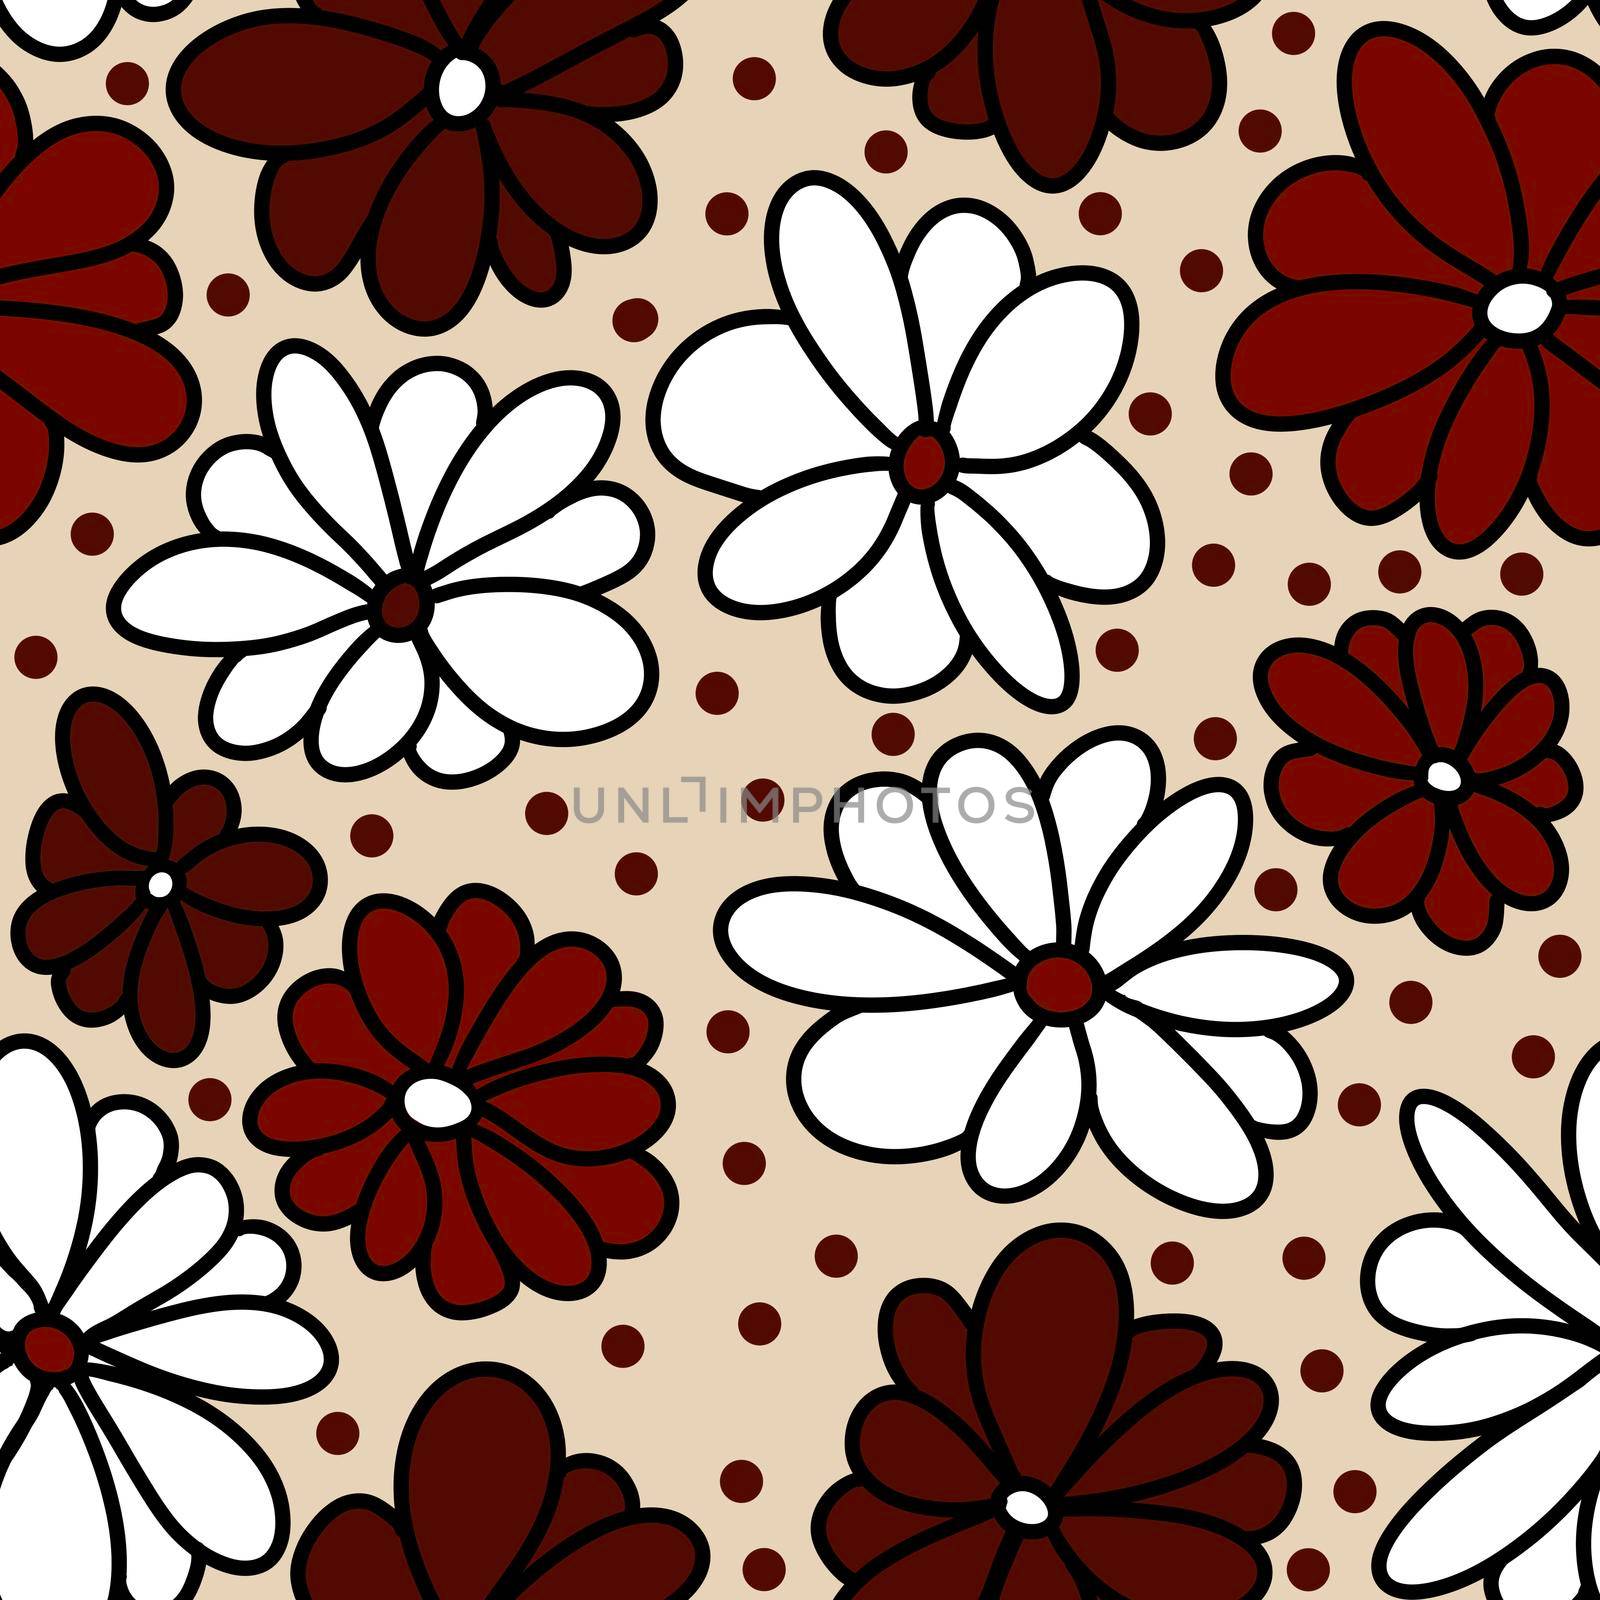 Hand drawn seamless floral pattern with burgundy marsala flowers on neutral beige background. Elegant red black white leaves petals blossom for textile wrapping paper. Summer fall autumn wedding design in minimalist style. by Lagmar